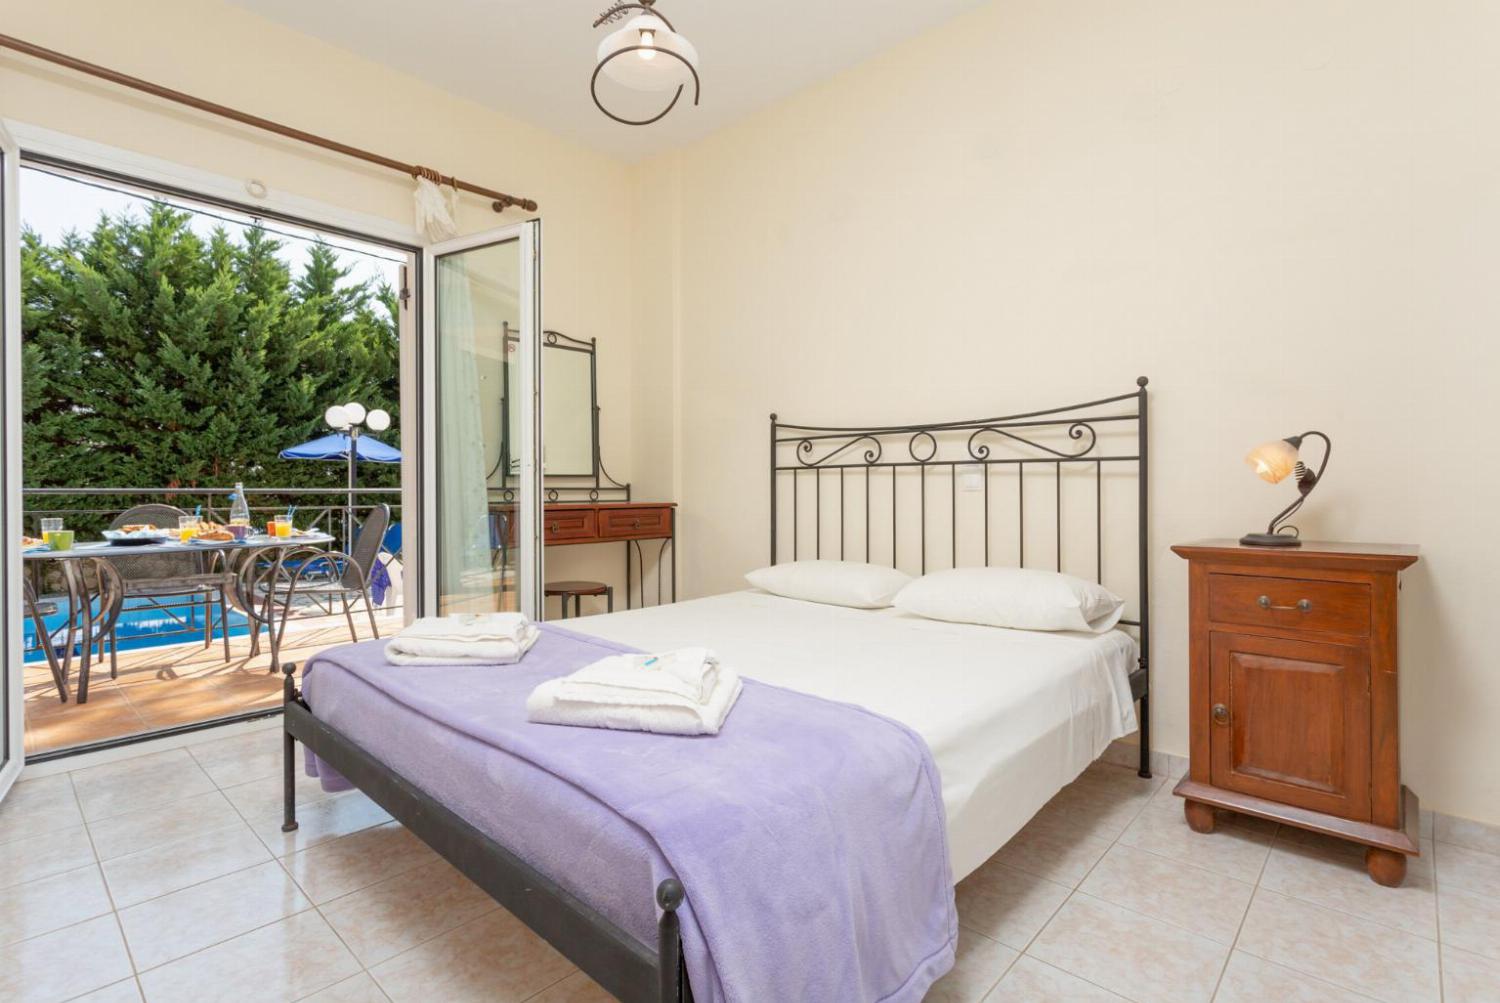 Double bedroom on ground floor, with en suite bathroom, A/C and terrace access to the pool